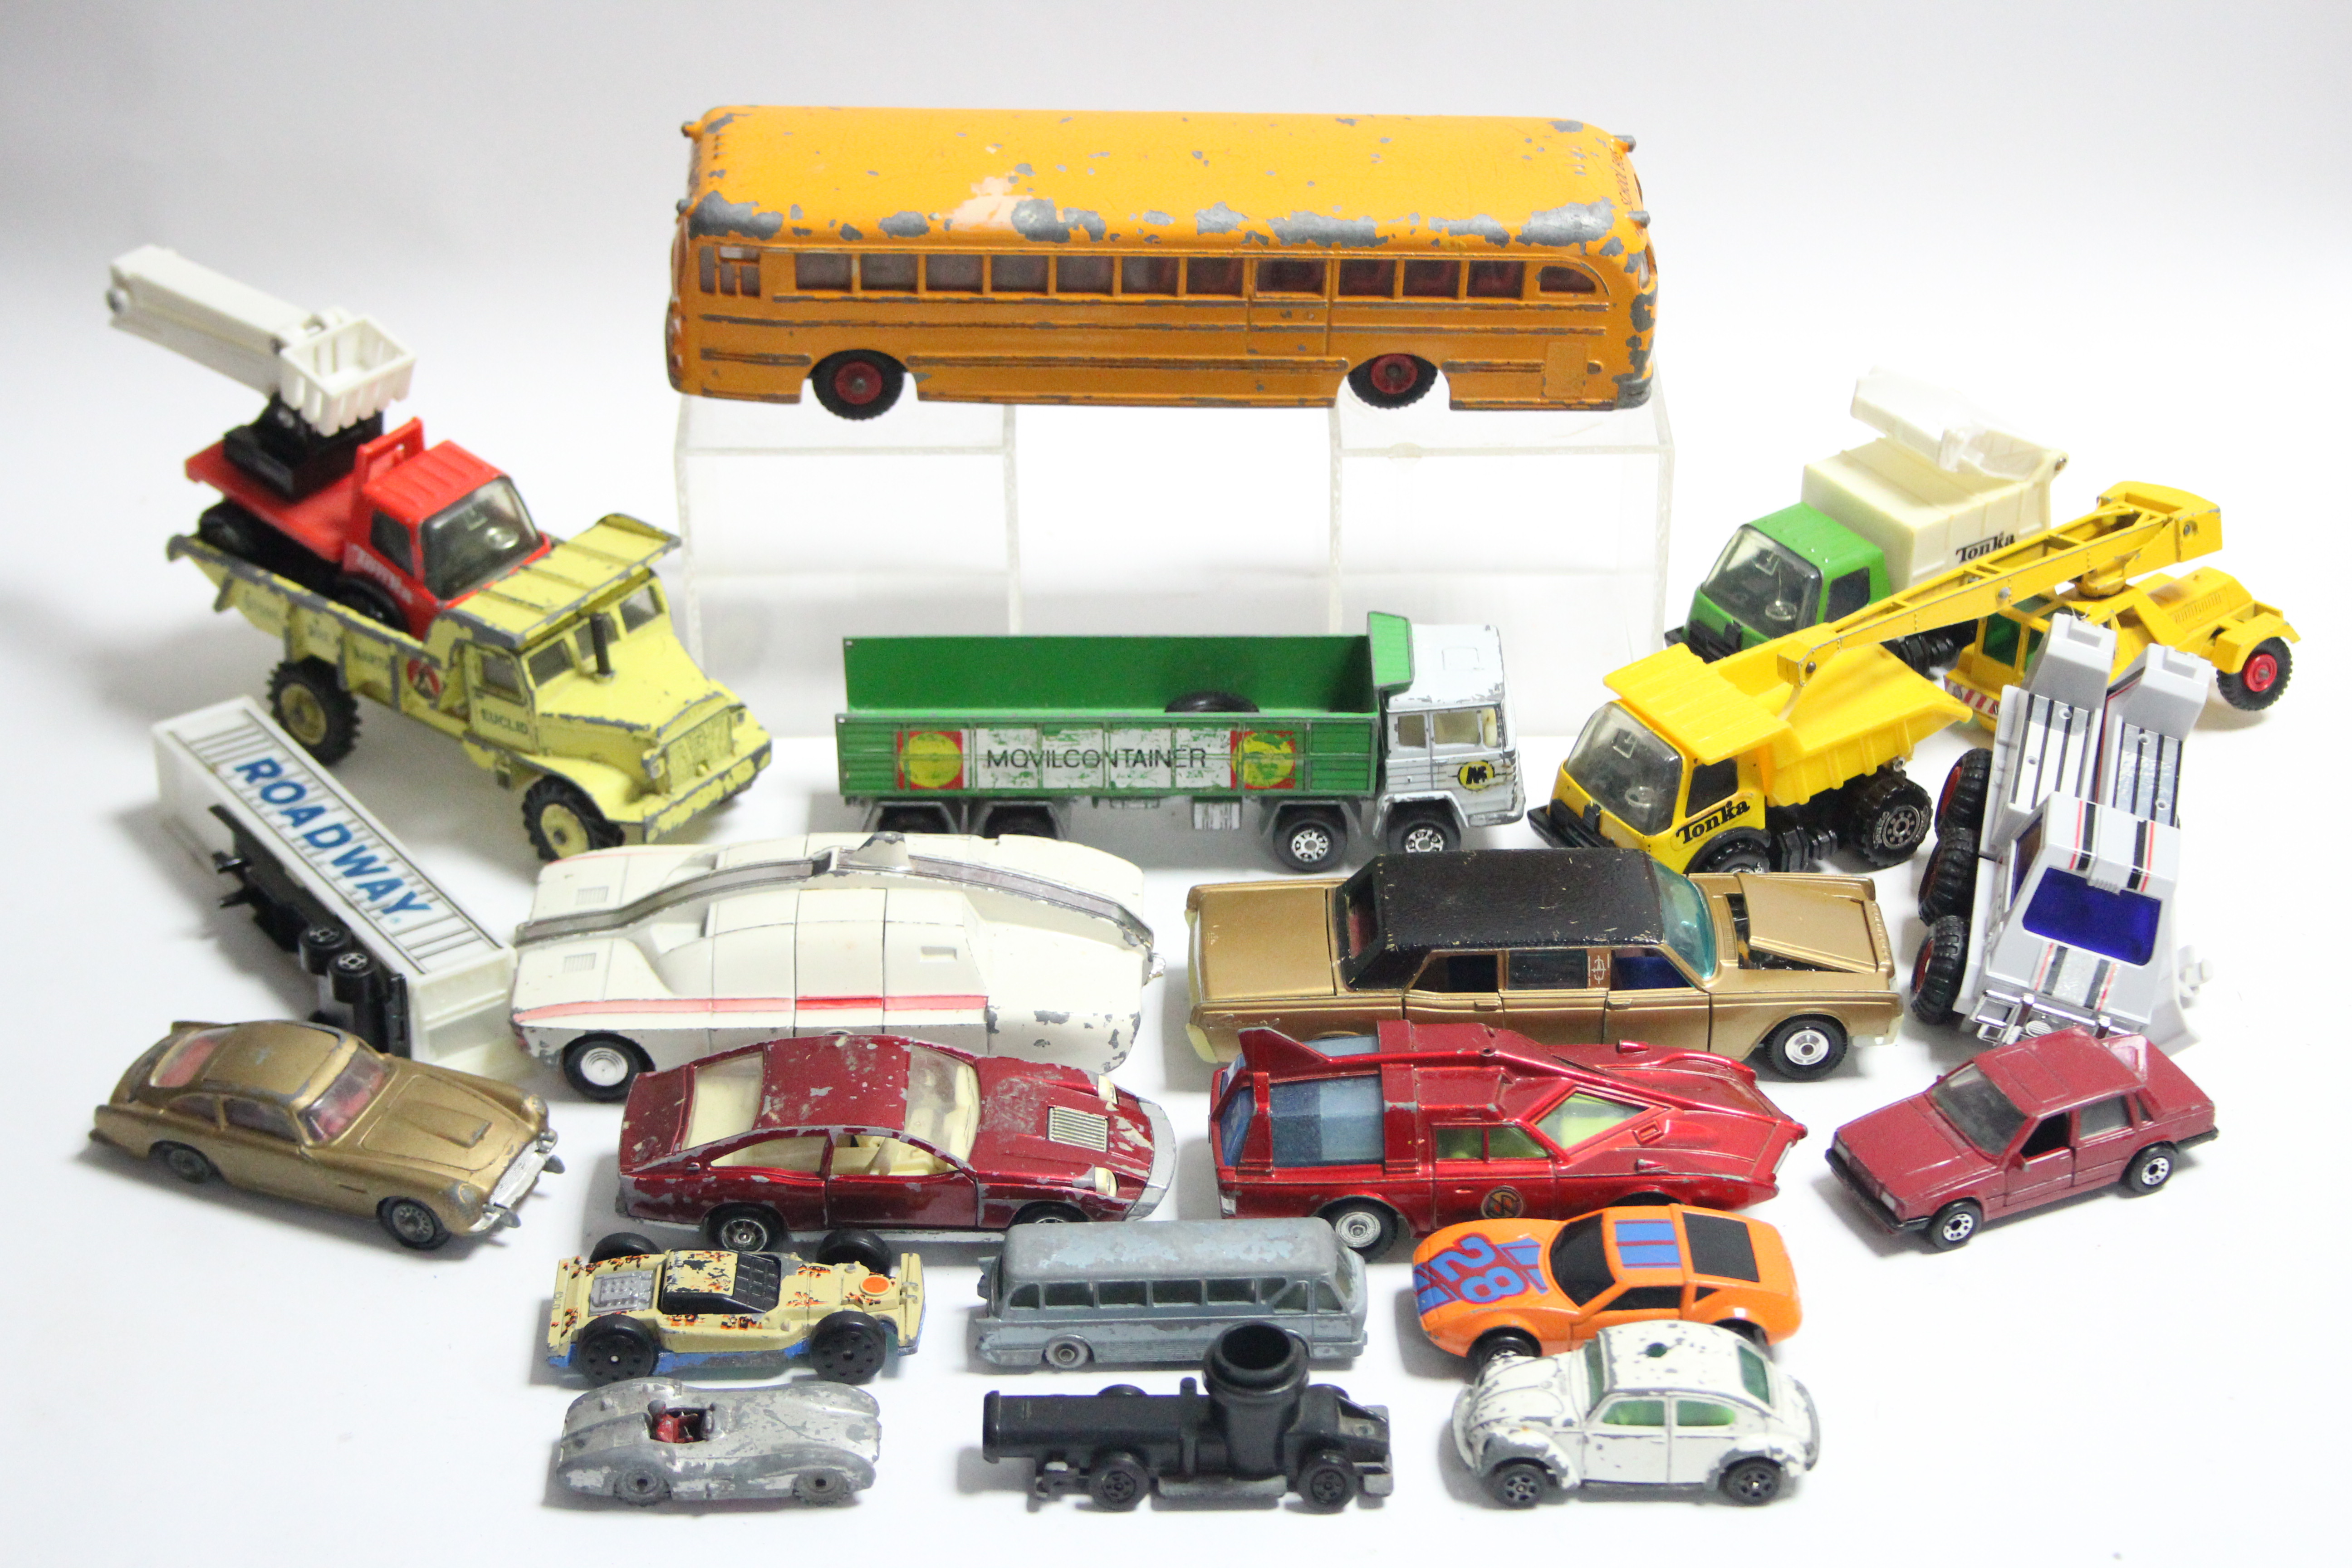 A Dinky Super toys scale model “Wayne Bus”; a Dinky scale model “Maximum Security Vehicle” (No.105);